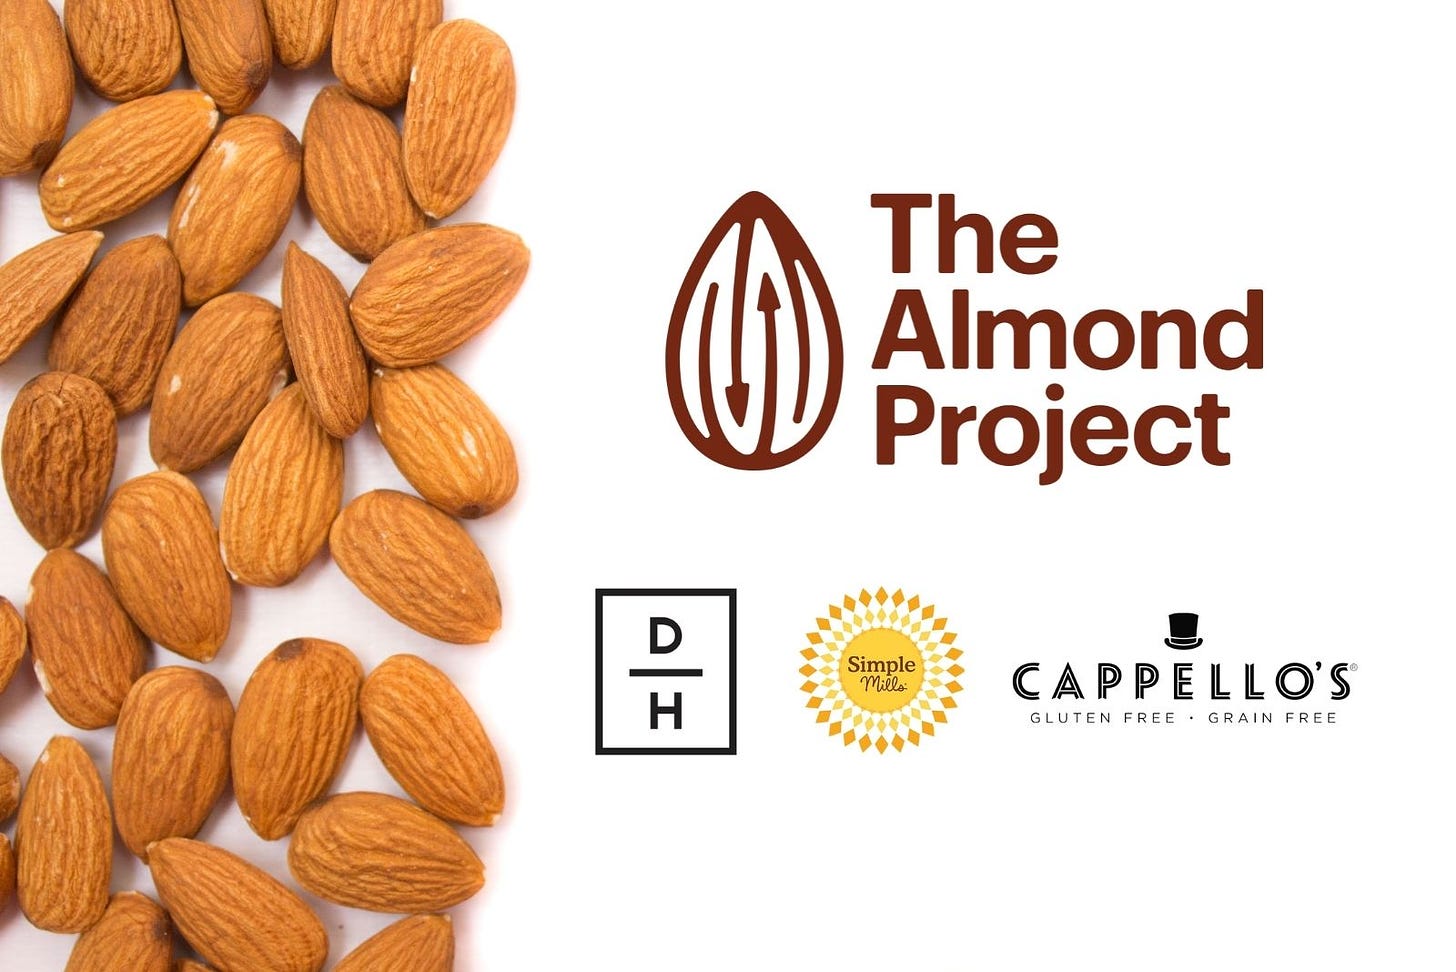 Simple Mills enters new brand partnership for sustainable almond farming -  Commercial Baking